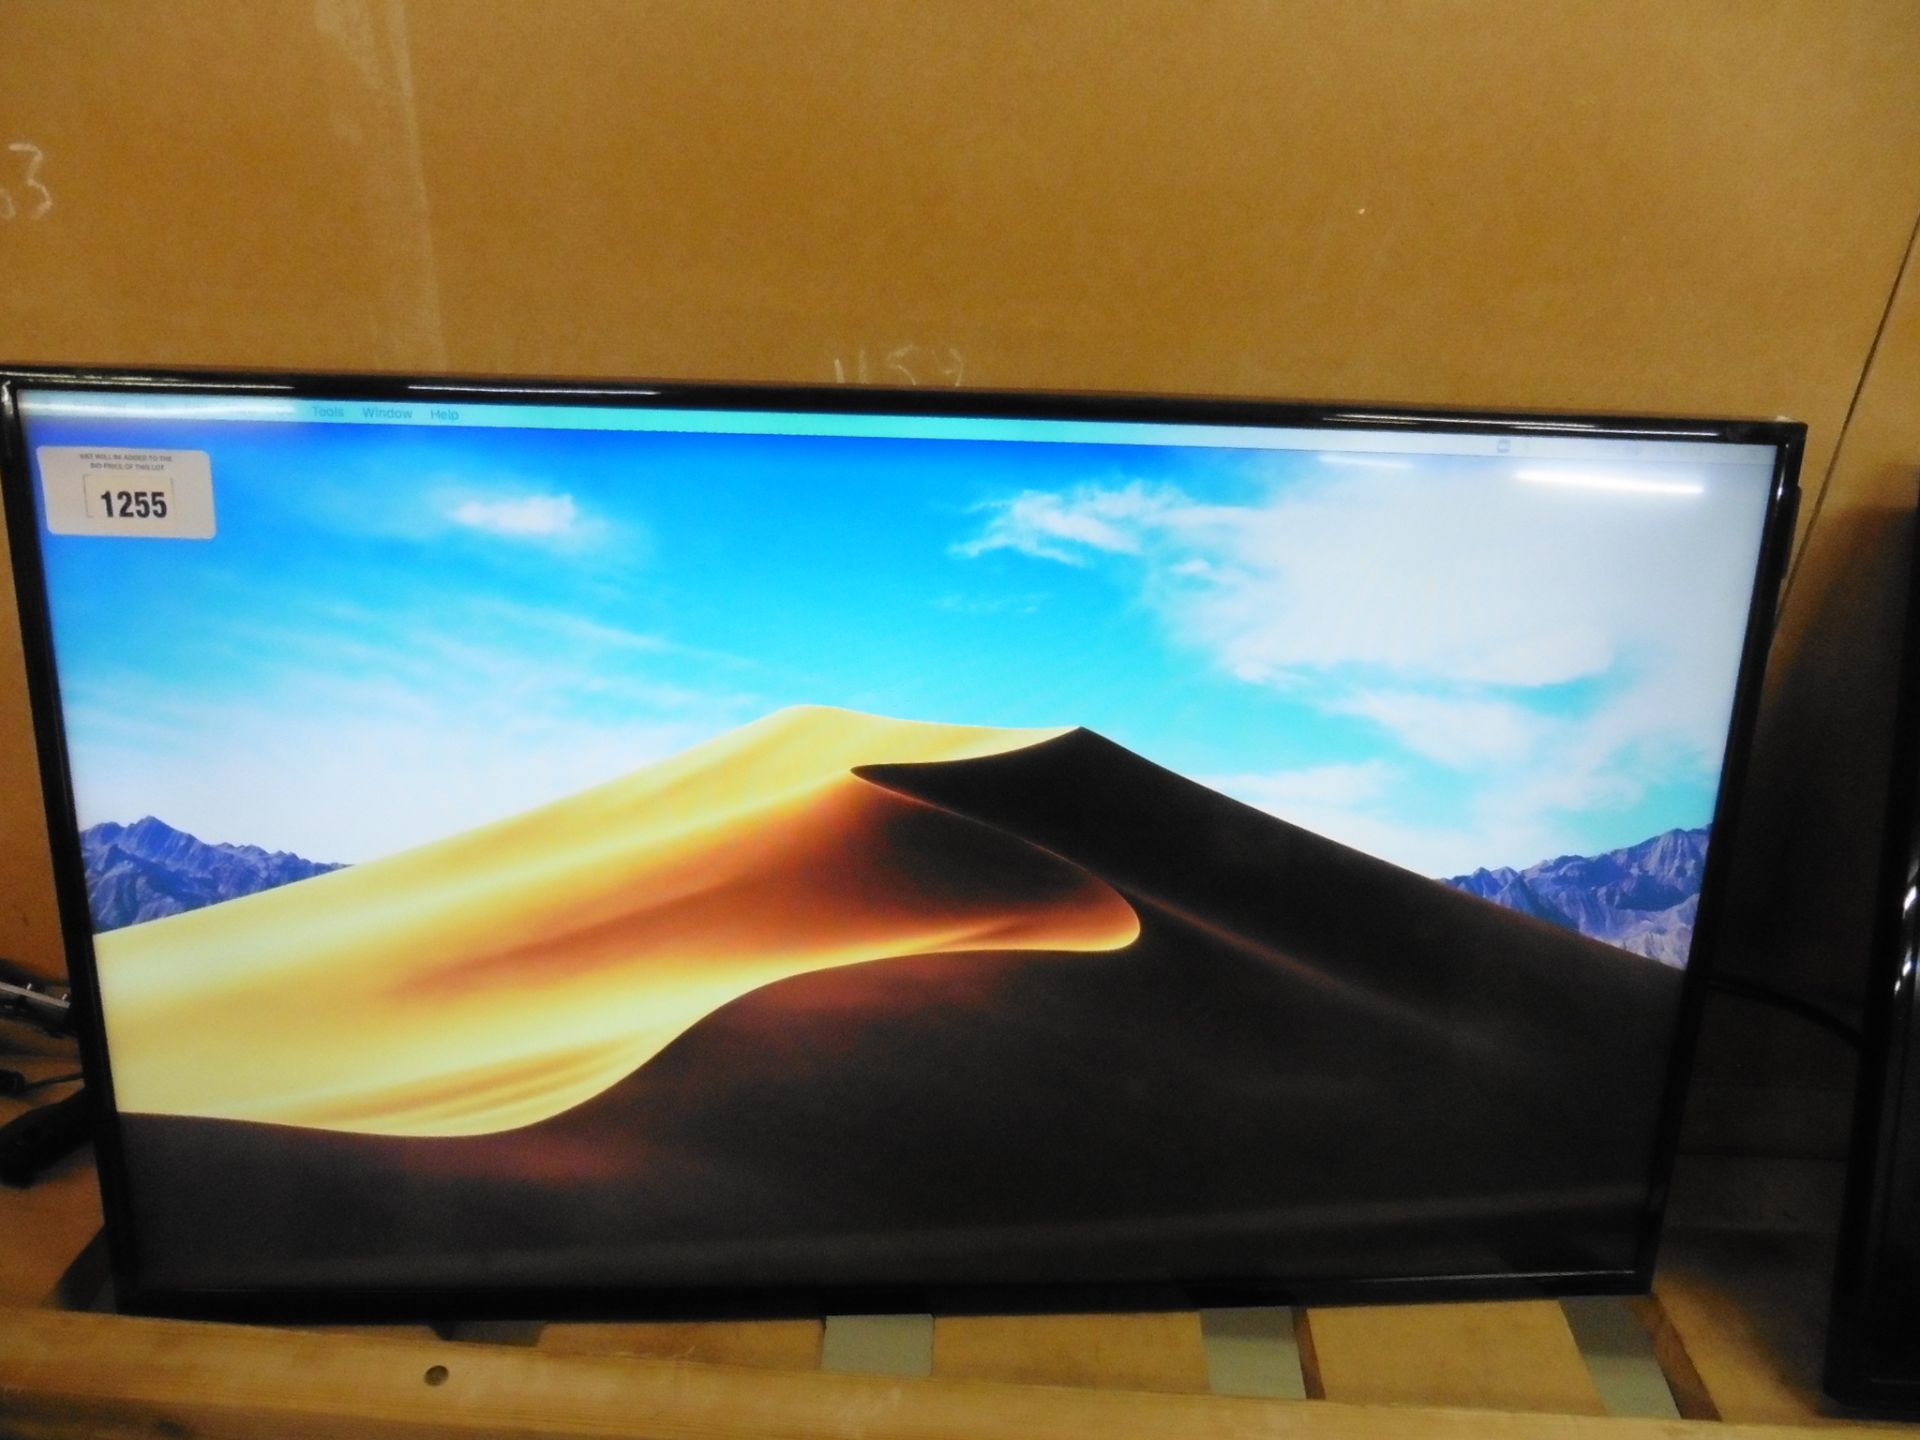 Samsung DM32D colour display monitor (manufactured 2015) - Image 3 of 3